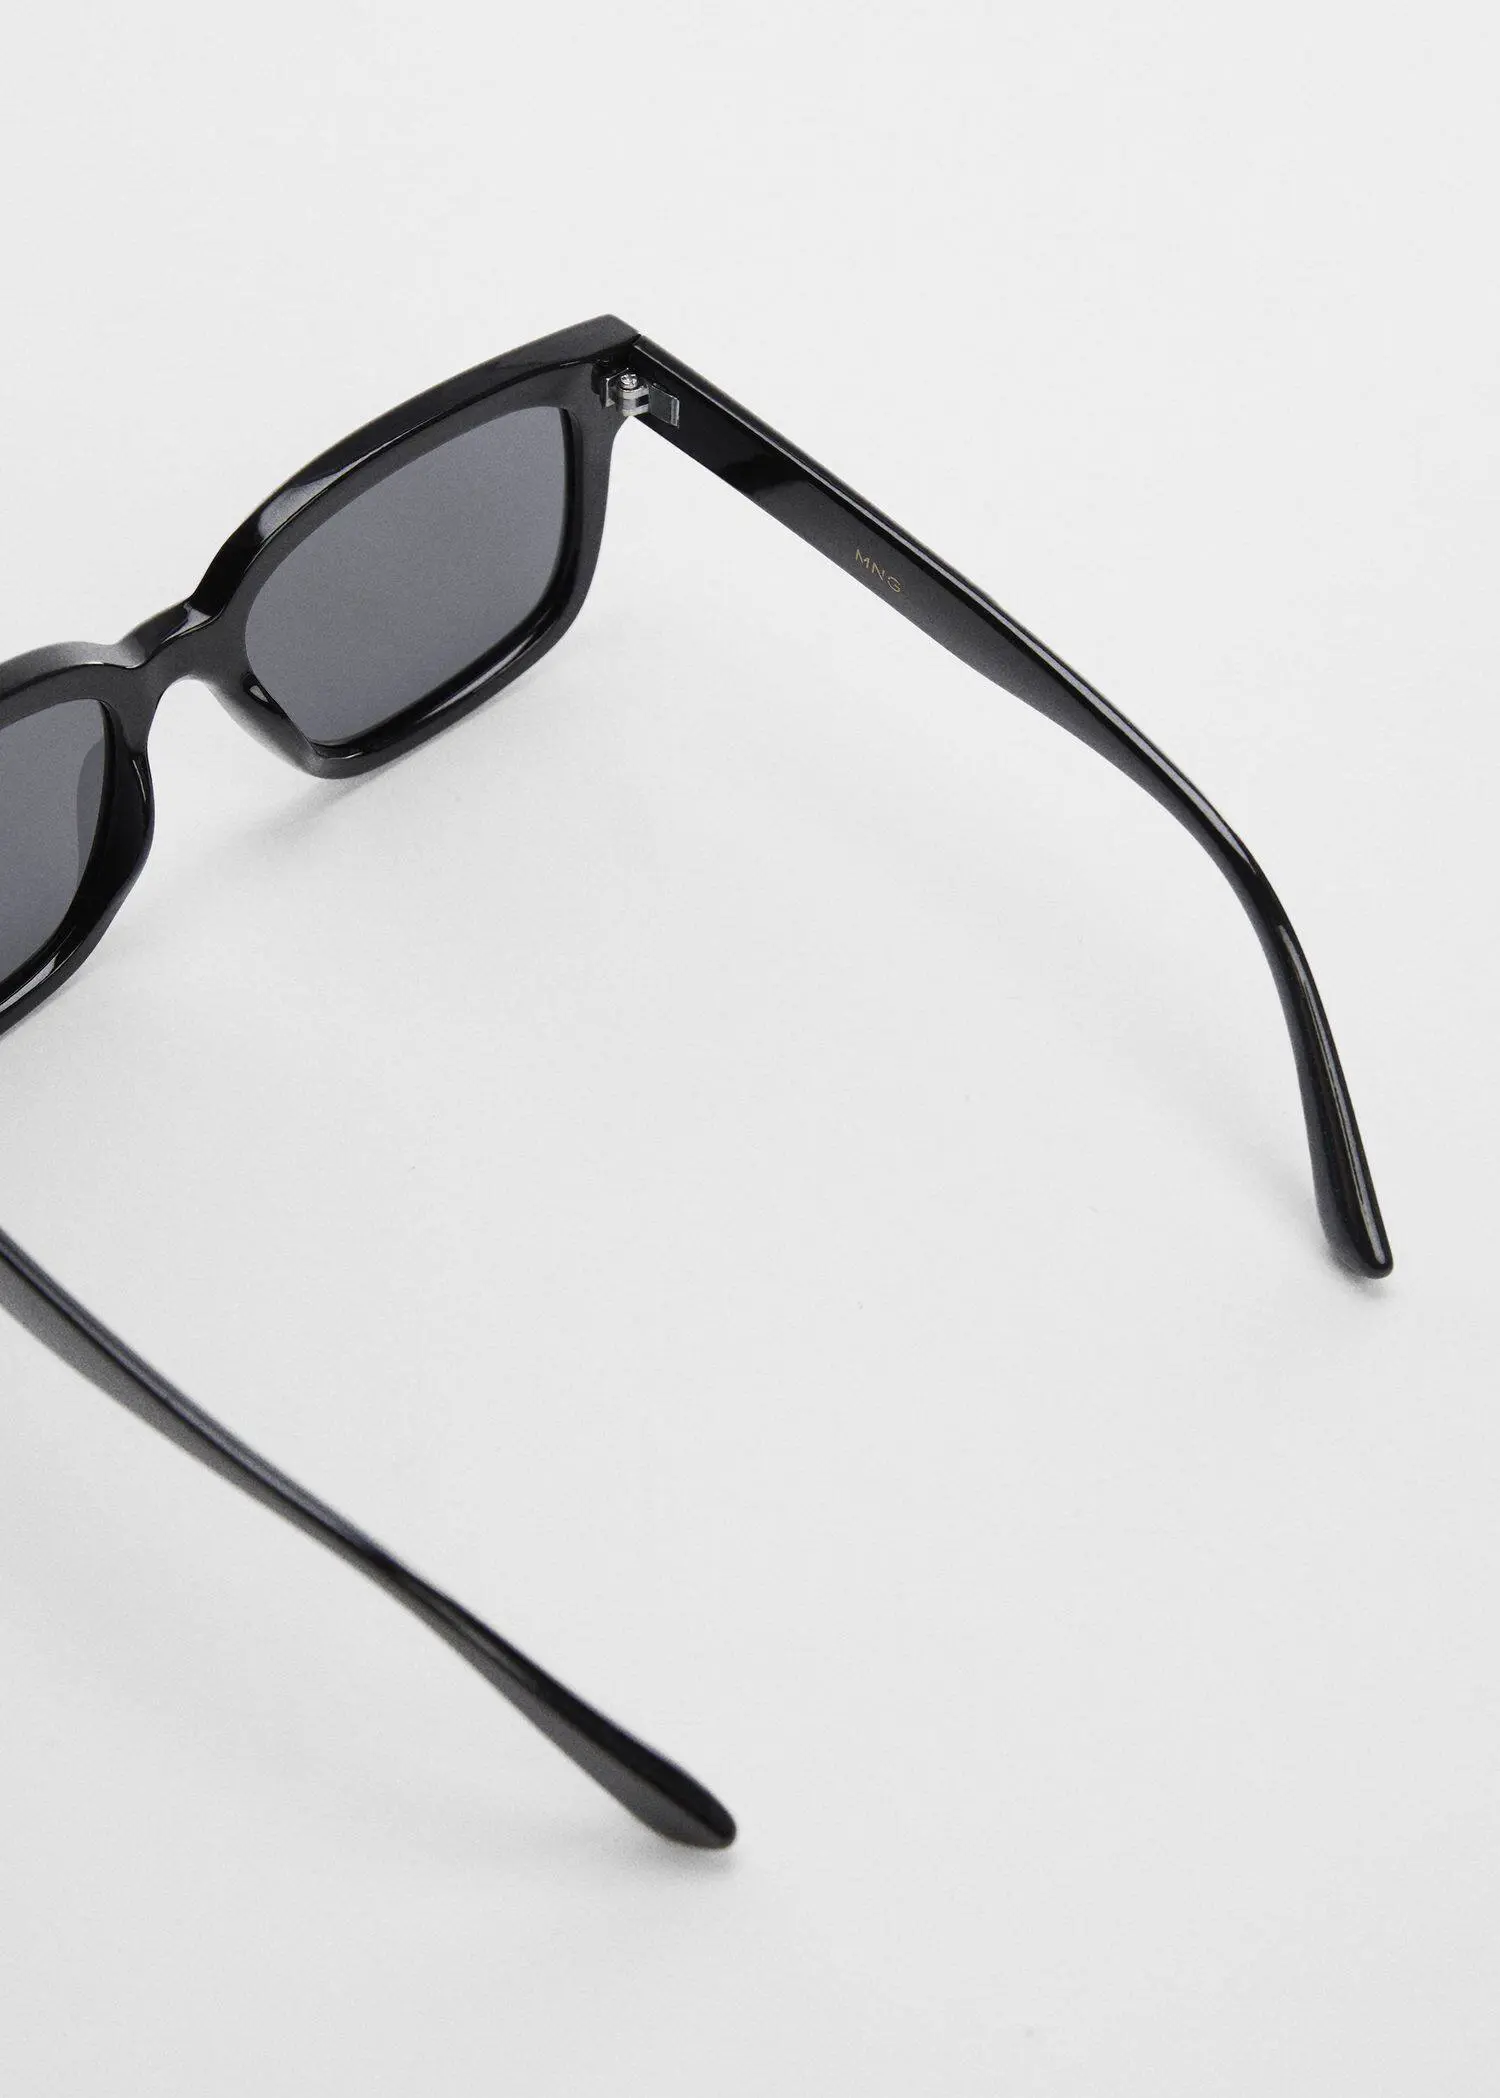 Mango Polarised sunglasses. a pair of black sunglasses on top of a white surface. 